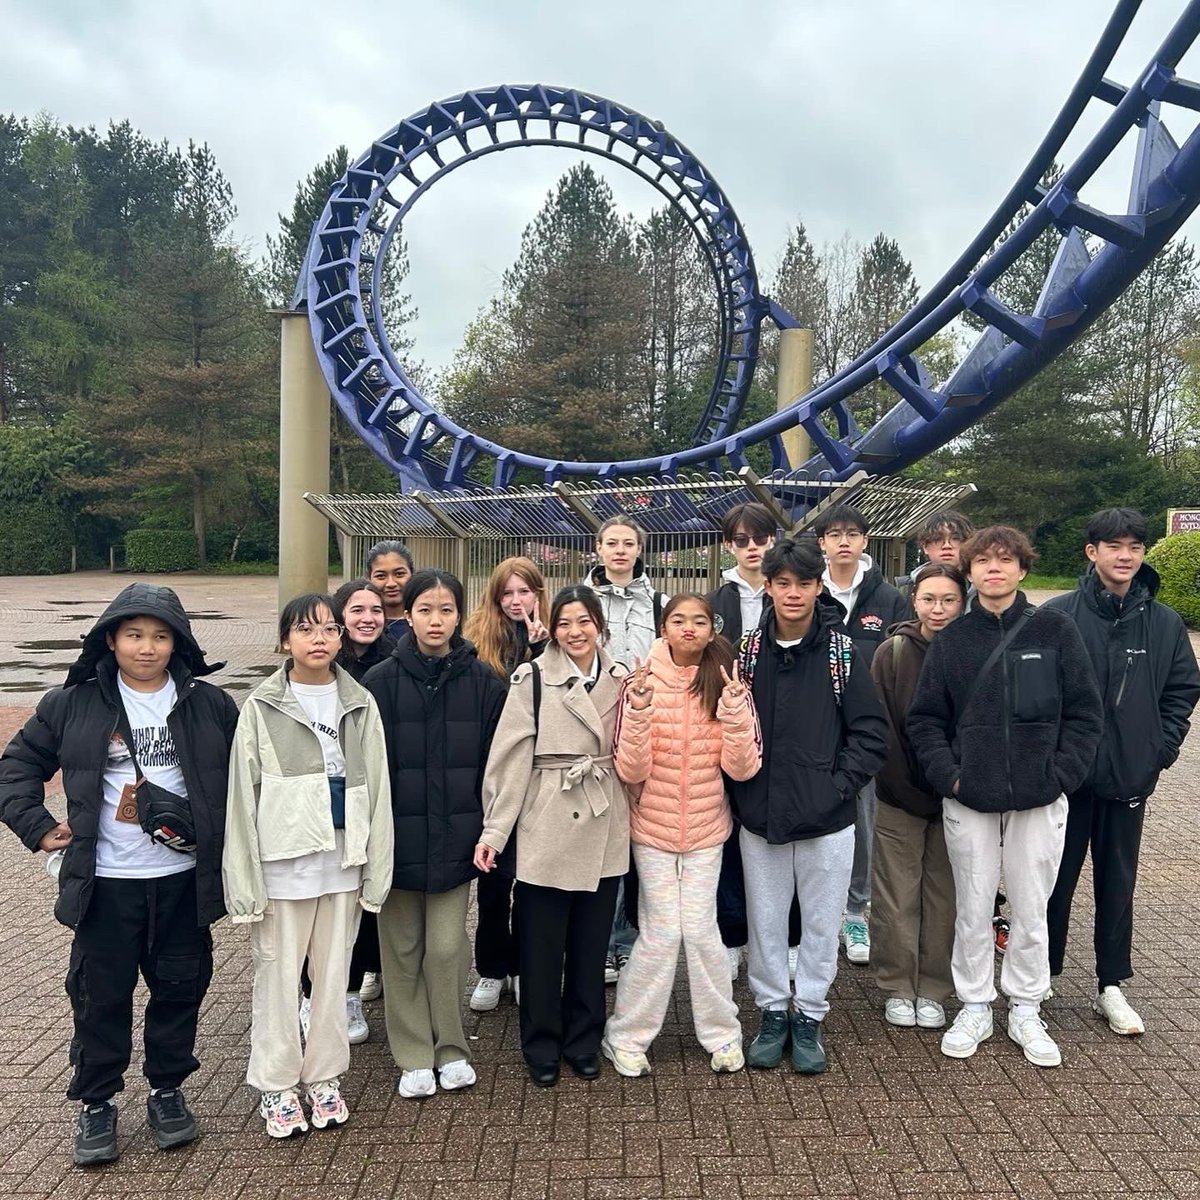 Last weekend, a group of our boarders, and our Thai immersion students, went to Alton Towers for the day, with Mr Jackson!

They managed to do all the big rides, dodged the rain and had a fabulous time together!

🎢🎢🎢

#iloveboarding